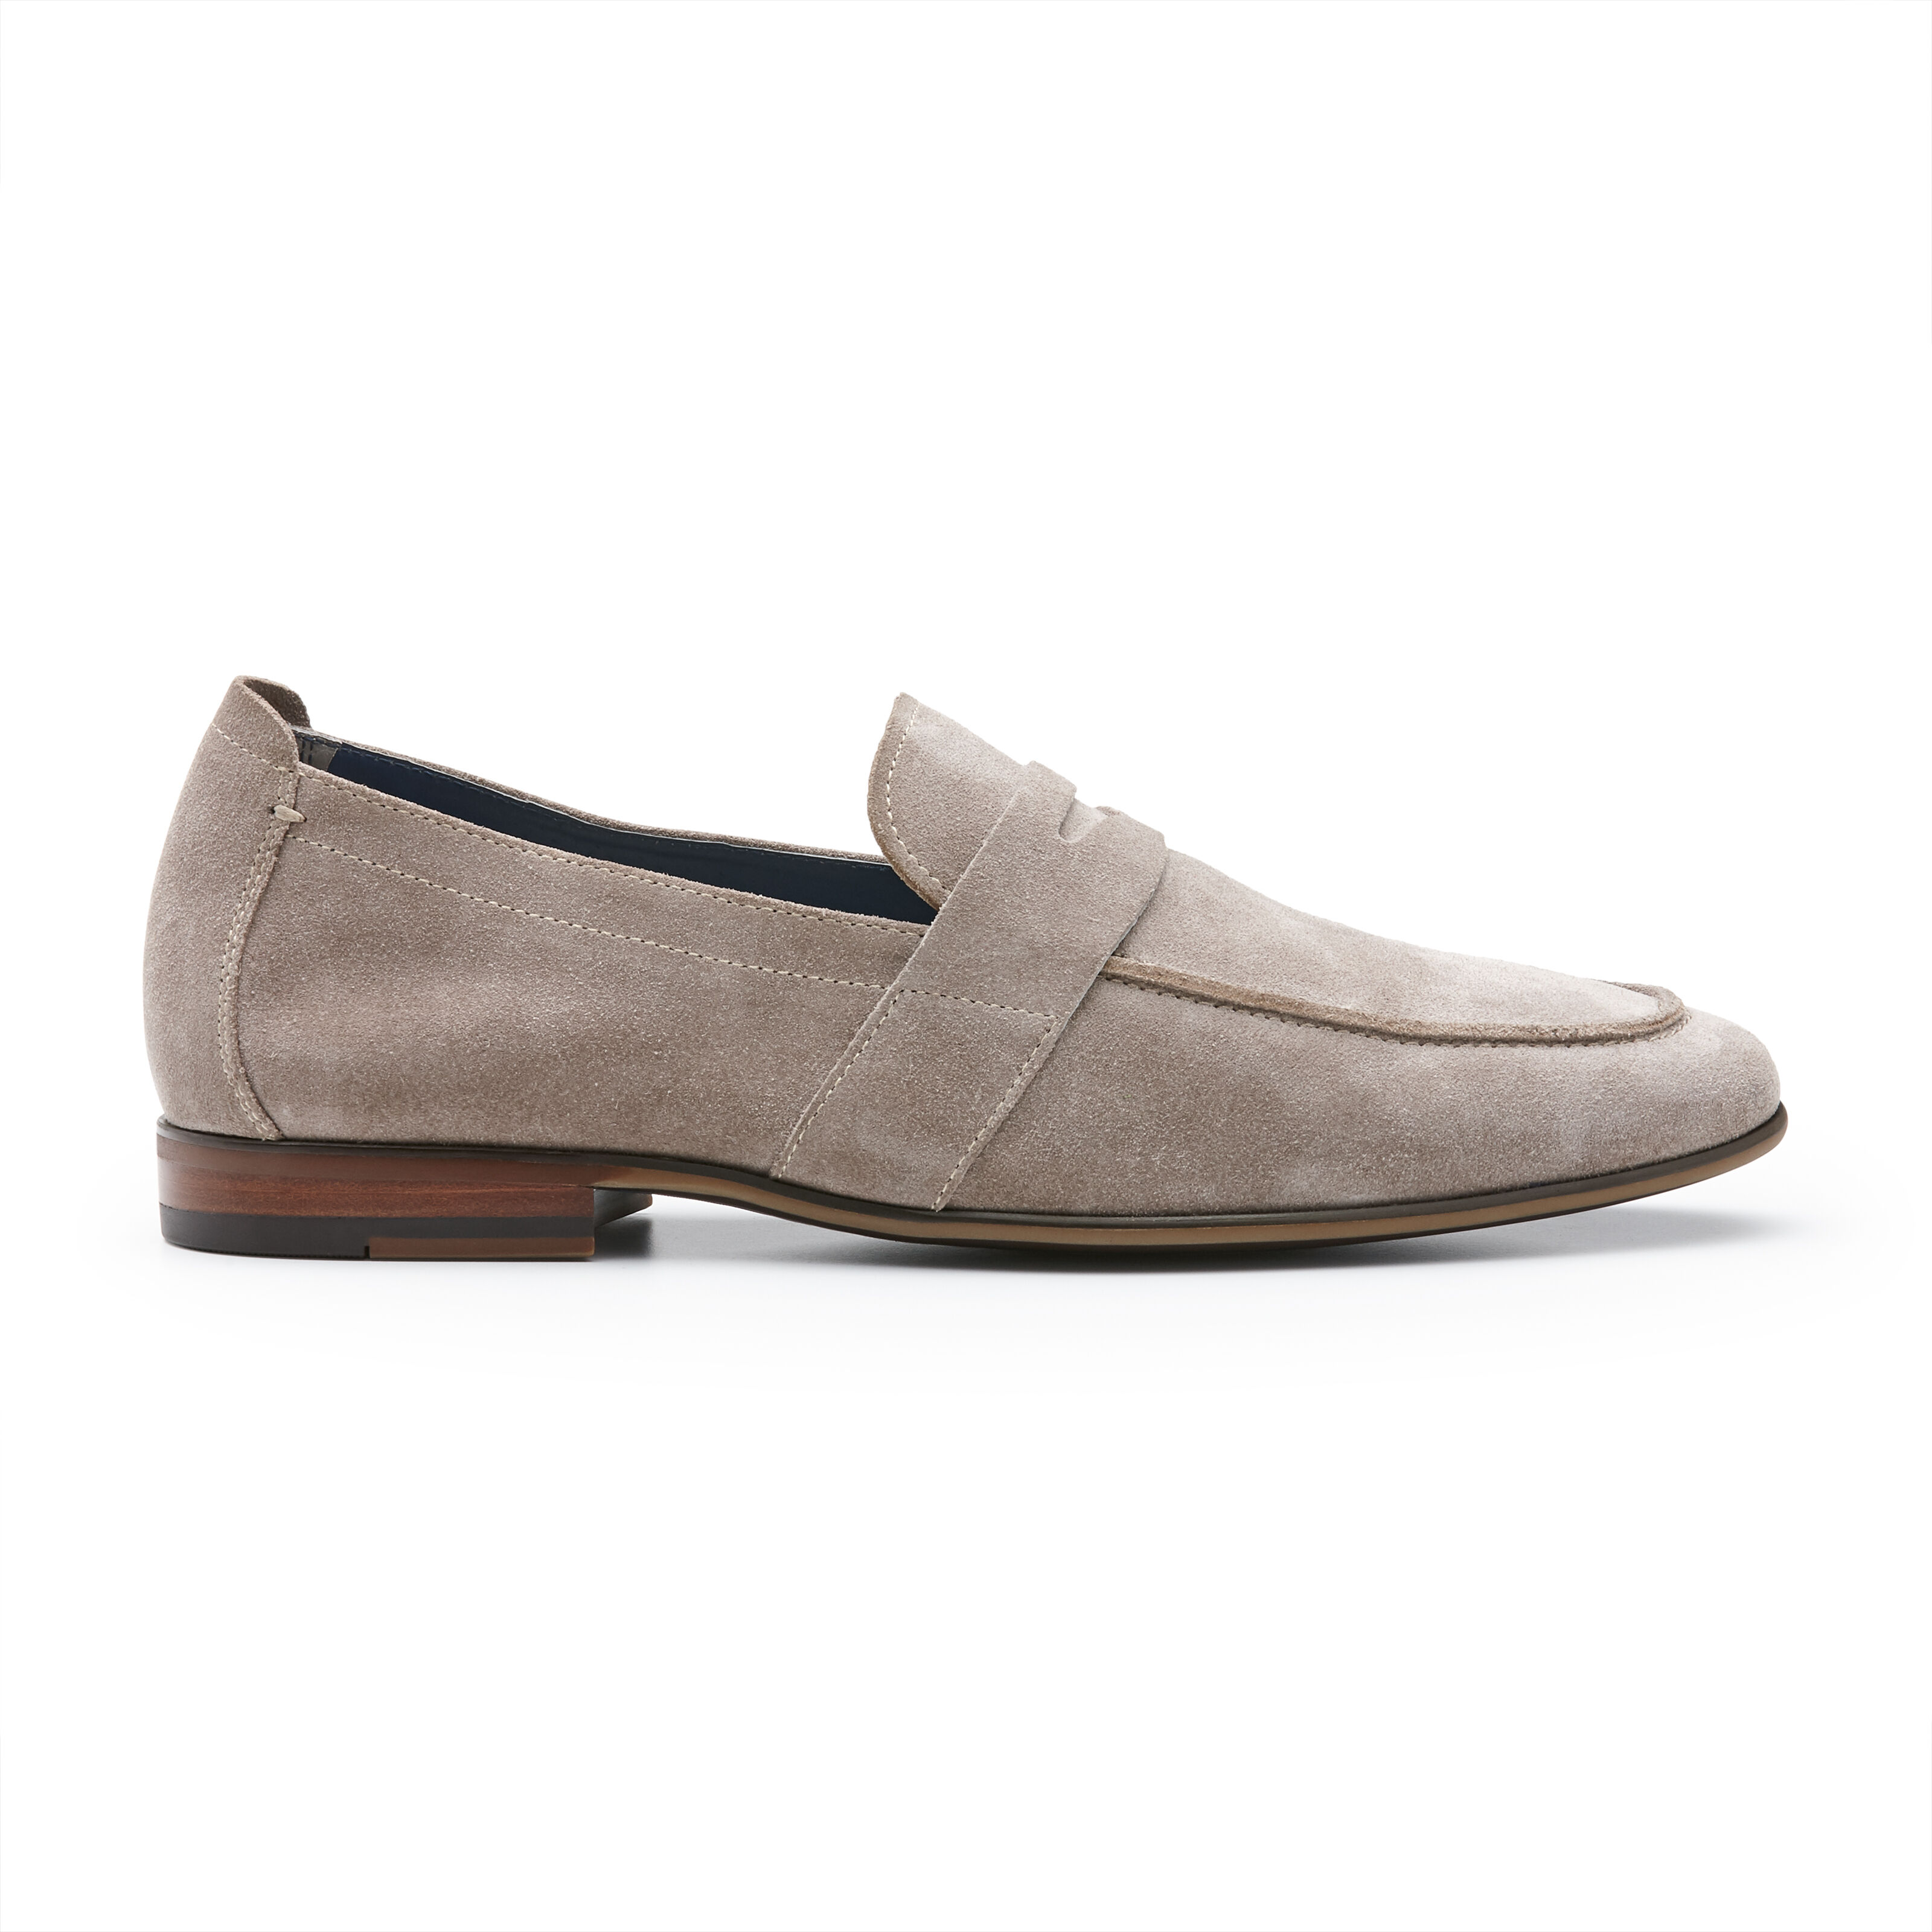 Super Soft Suede Leather Loafers 